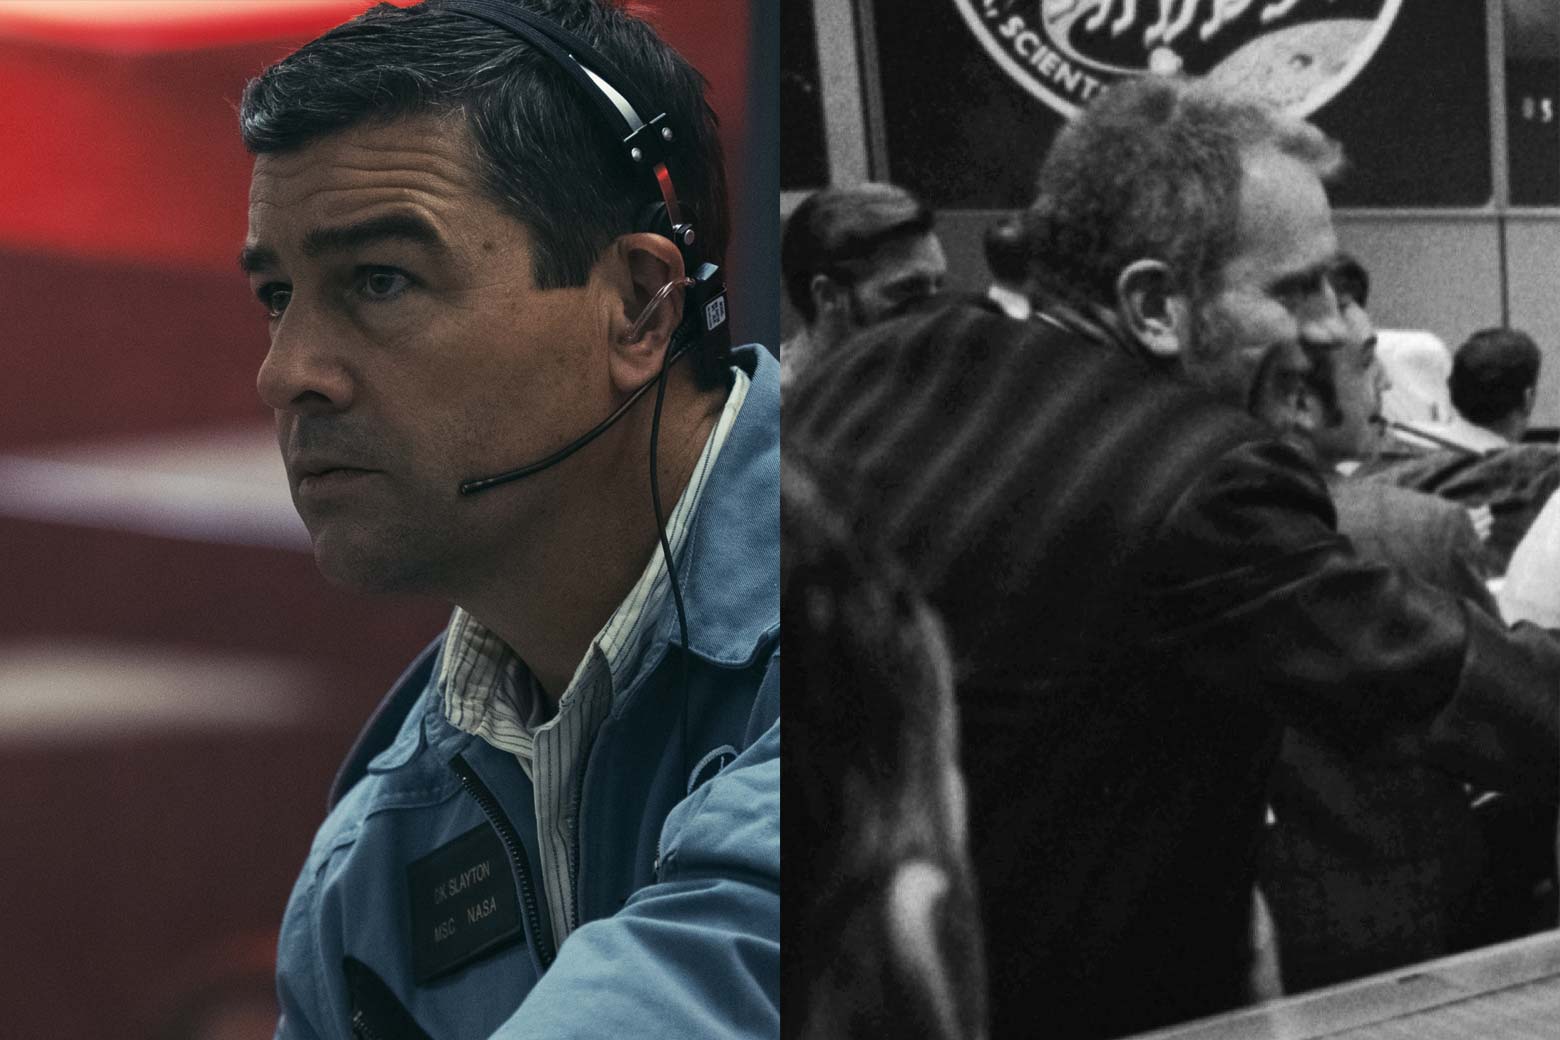 Side-by-side photos of actor Kyle Chandler and Deke Slayton.